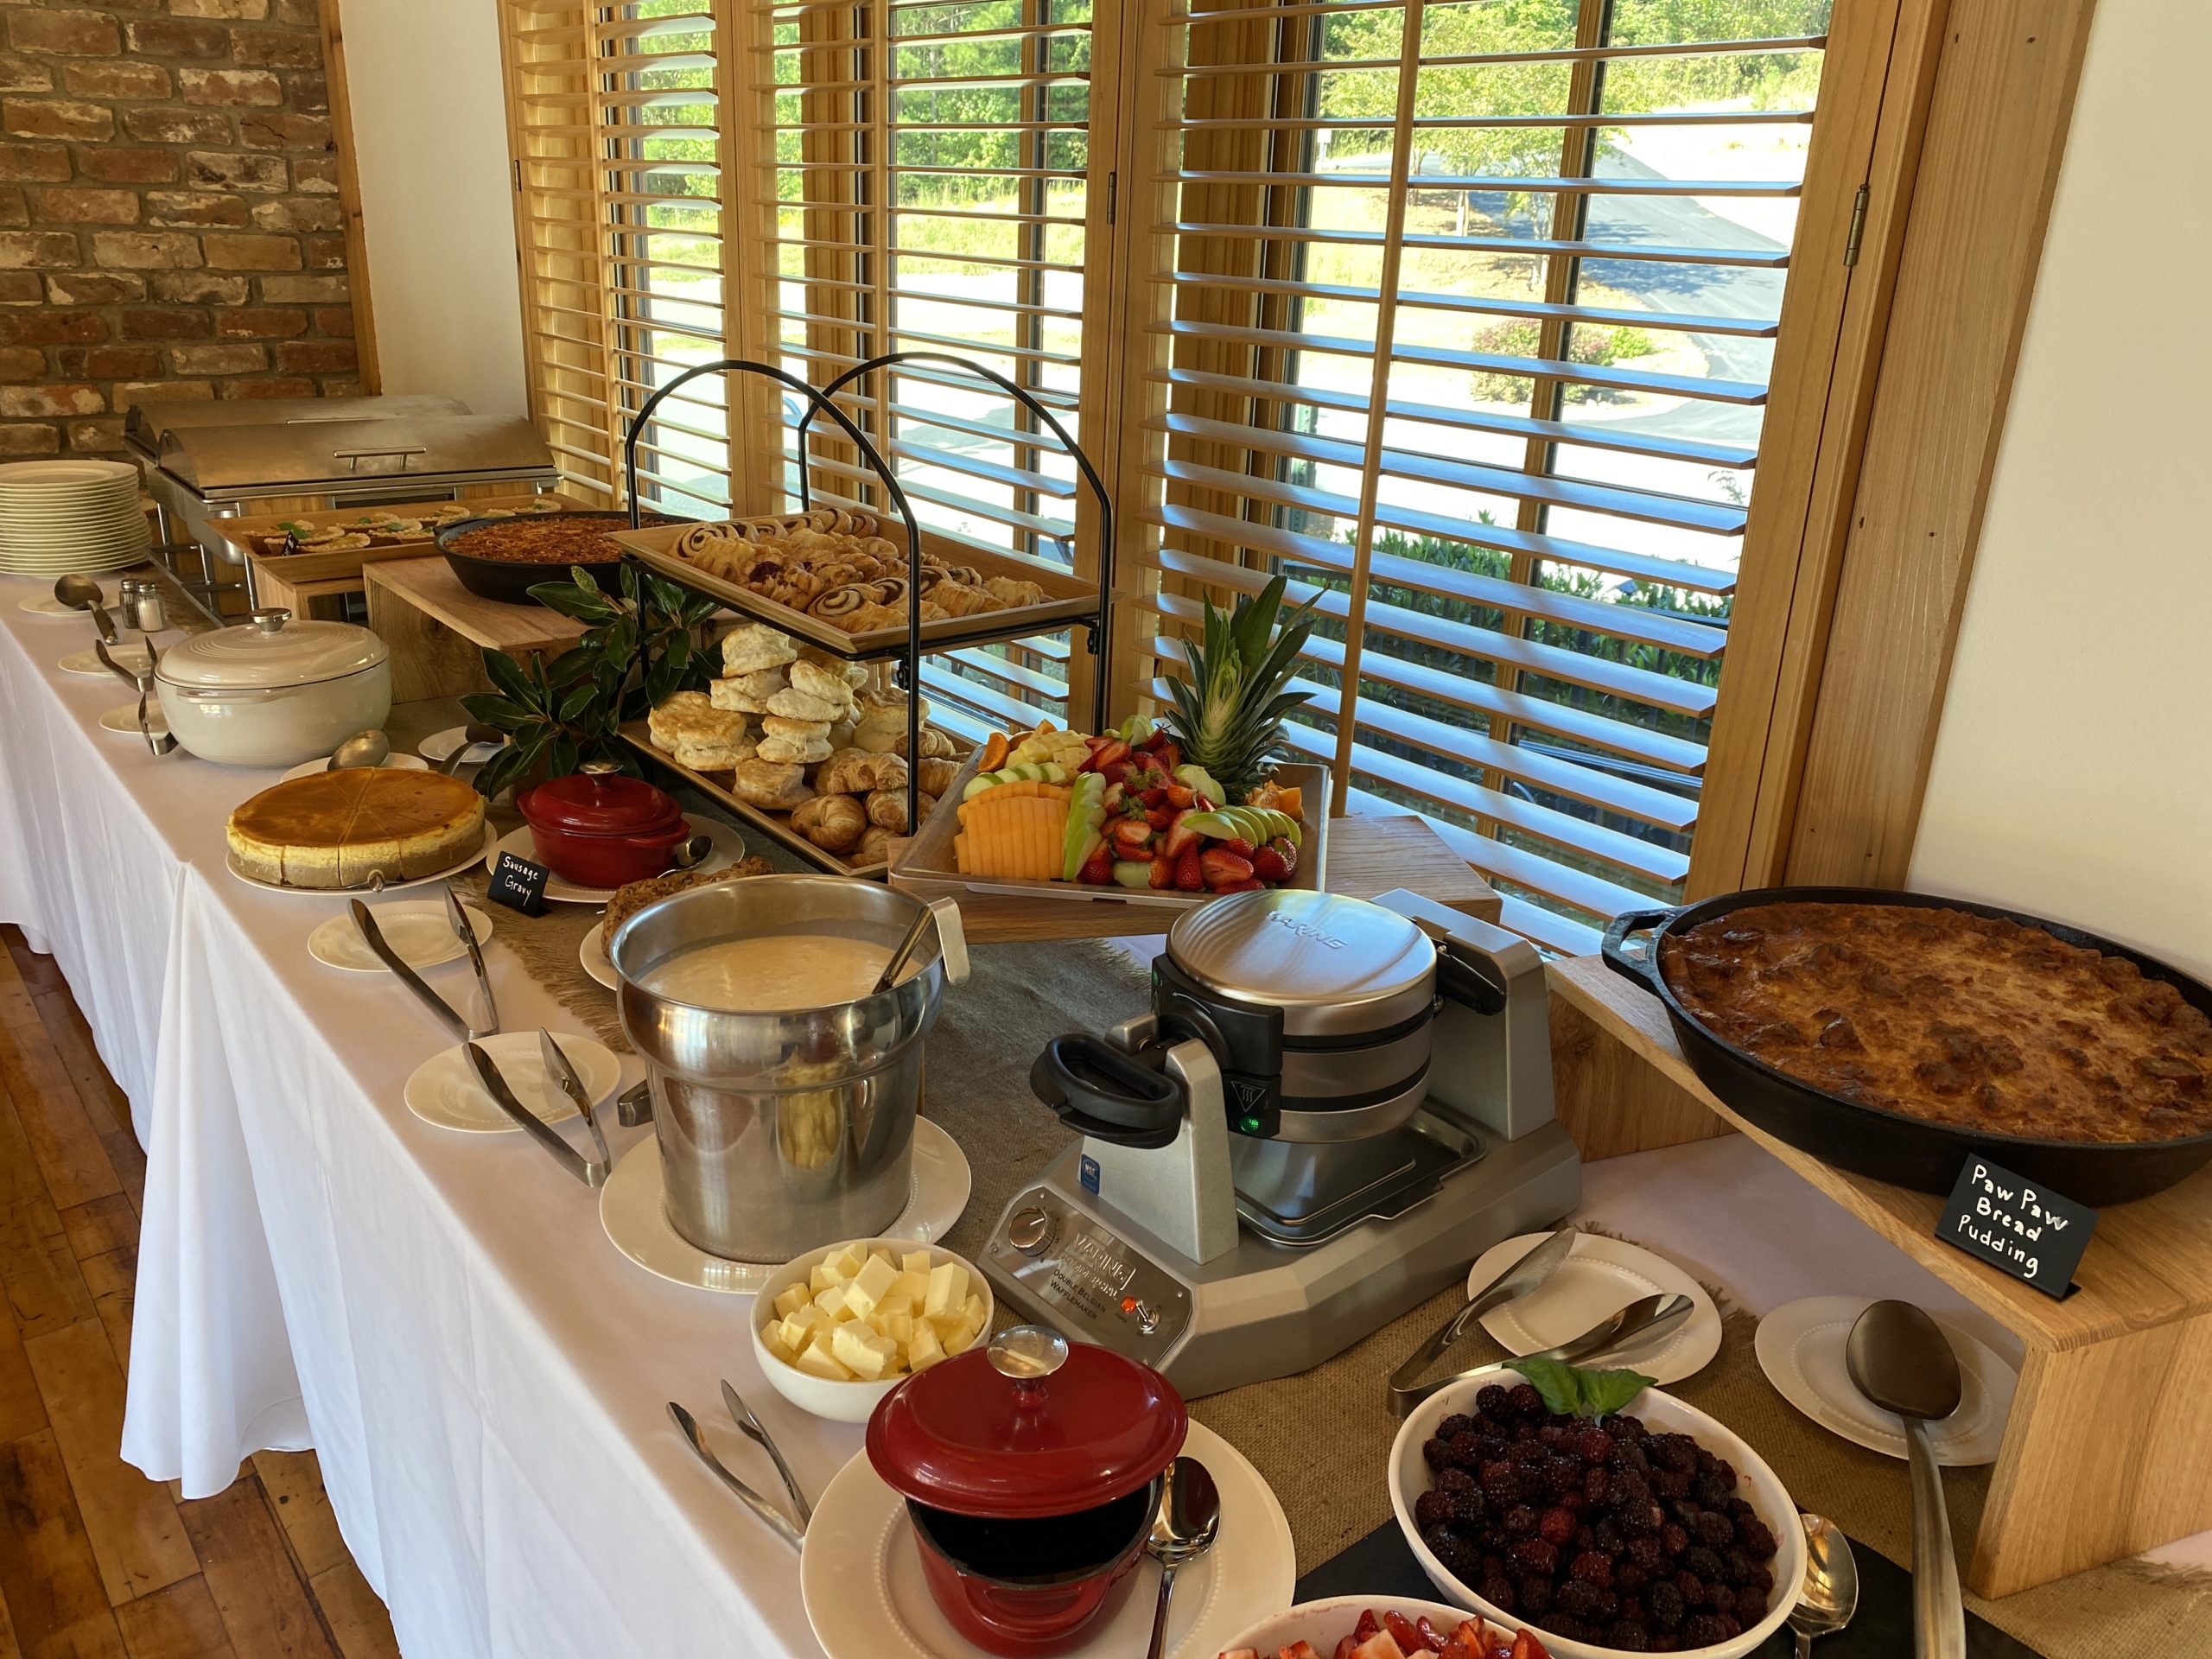 Brunch setup with pastries, fruit, and more